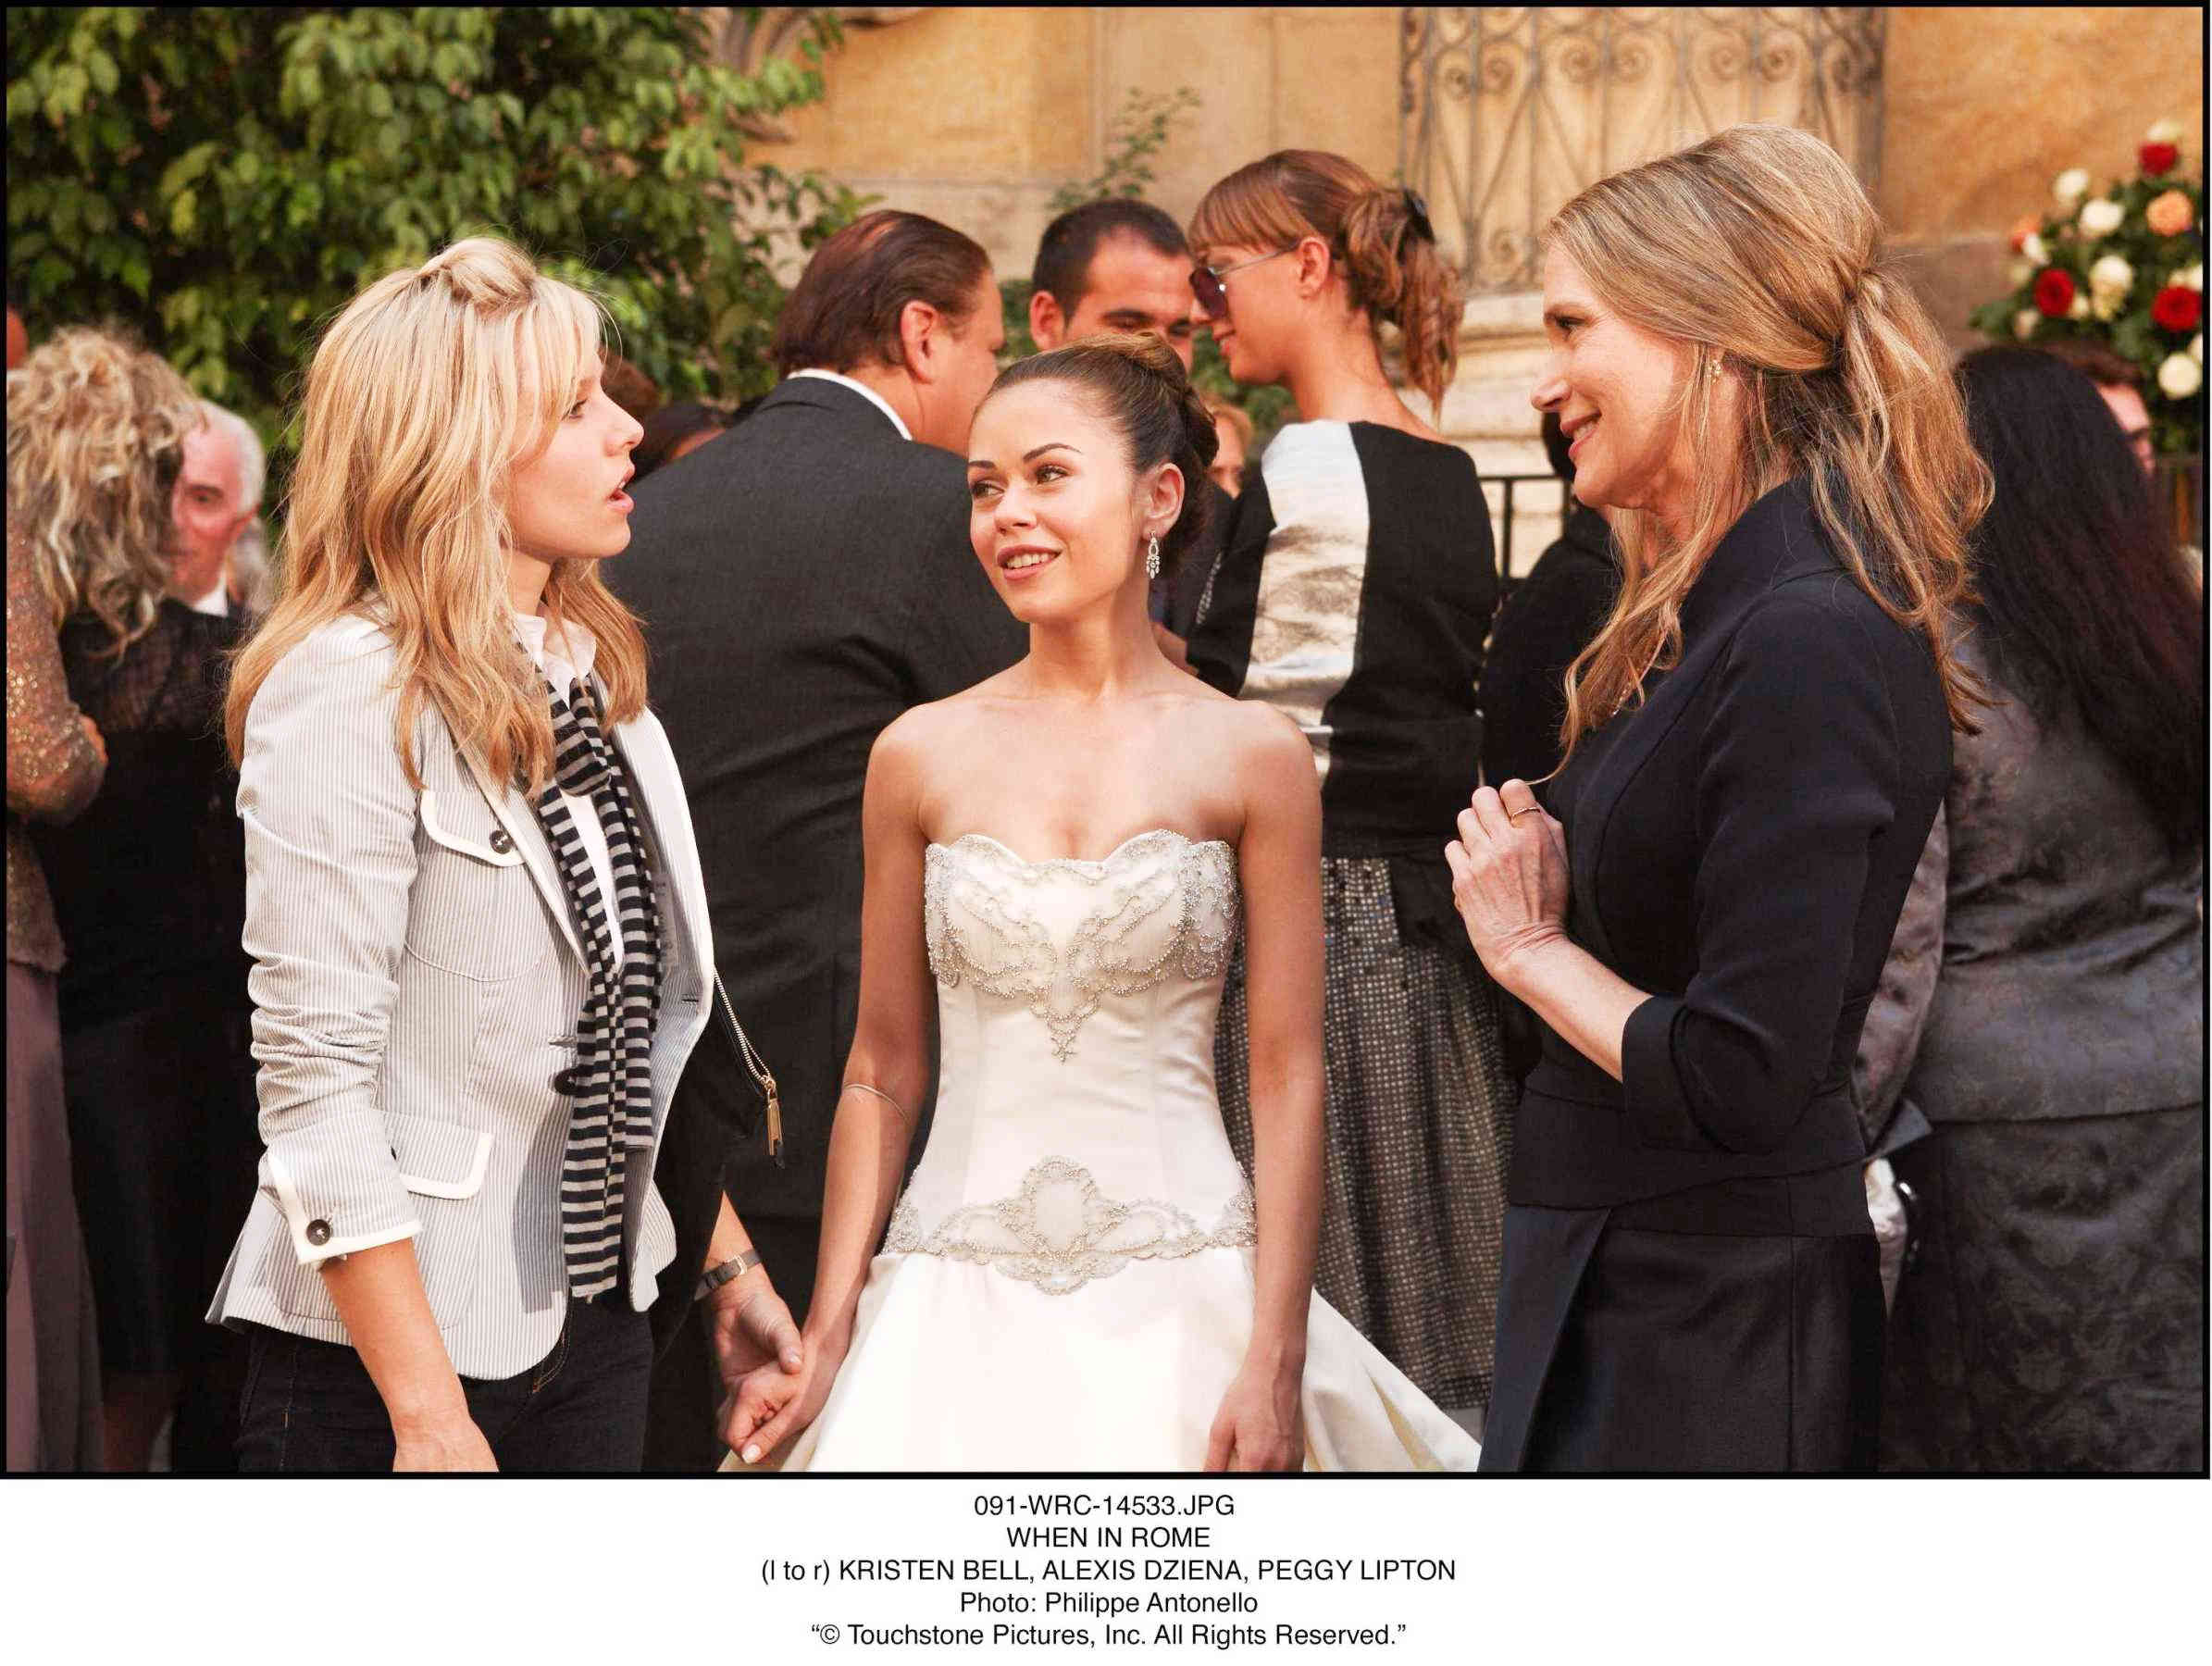 Kristen Bell, Alexis Dziena and Peggy Lipton in Walt Disney Pictures' When in Rome (2010). Photo credit by Myles Aronowitz.